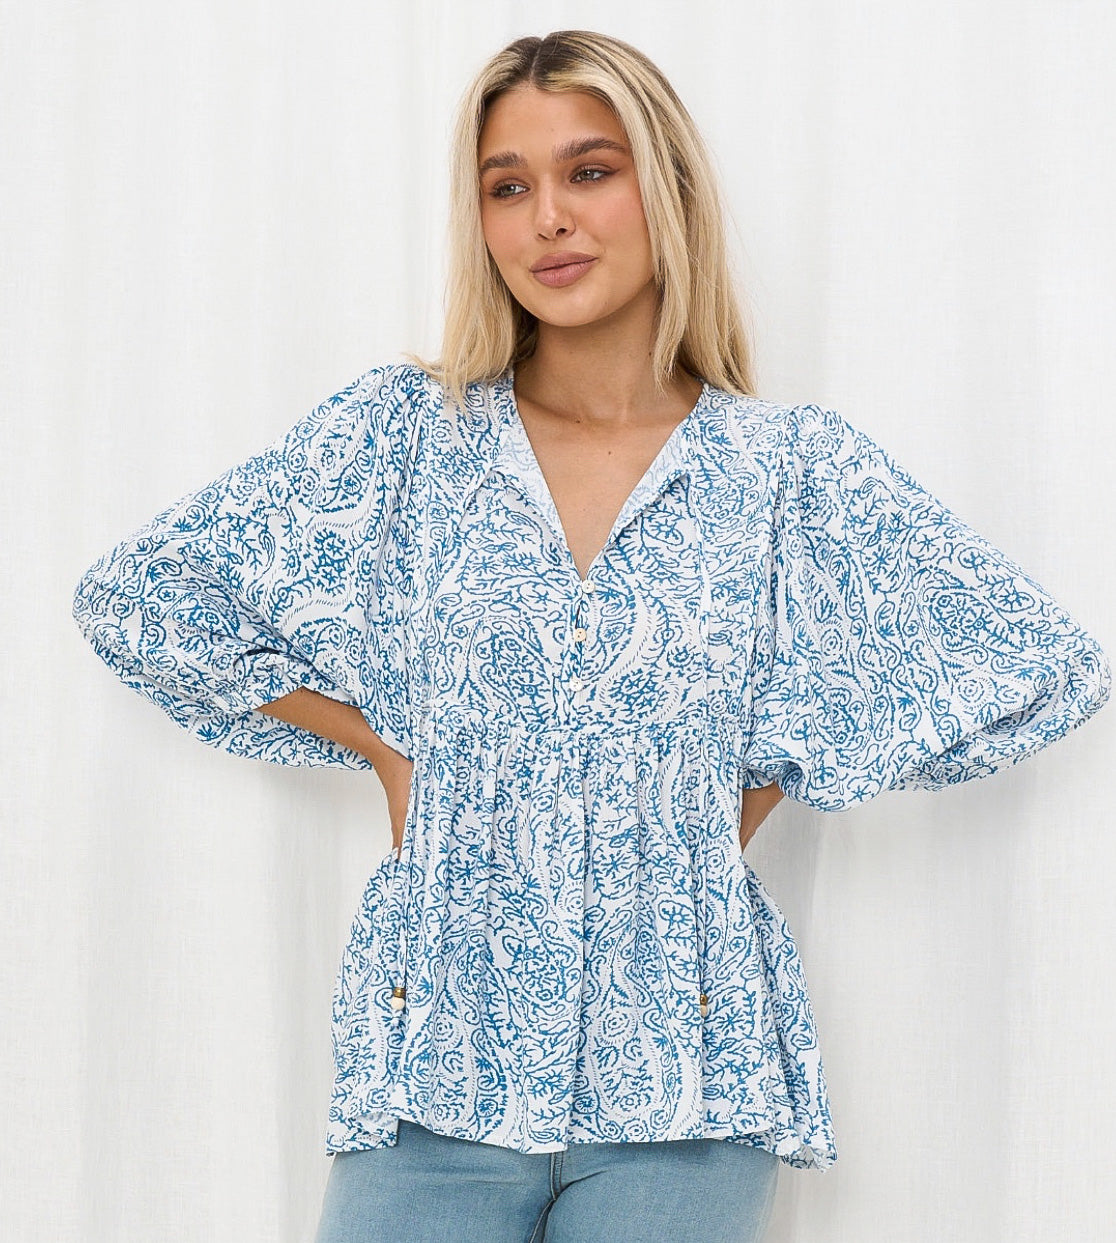 Belle Blue and White Print Blouse